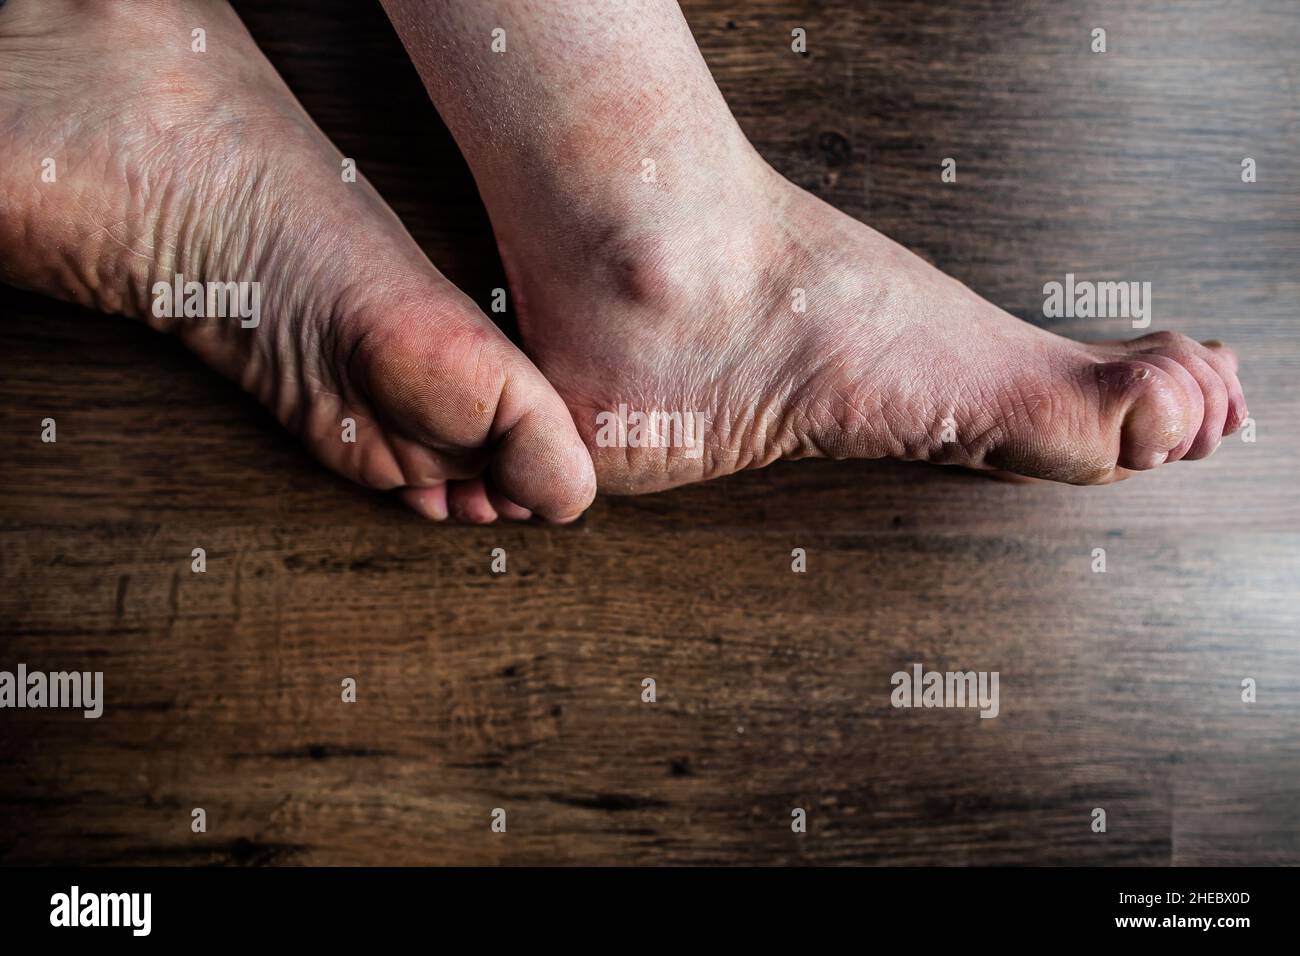 Feet of person with Raynaud's and Ehlers-Danlos syndrome (EDS) with swollen toes, damaged very dry irritated skin Raynaud’s phenomenon disease Pain Stock Photo